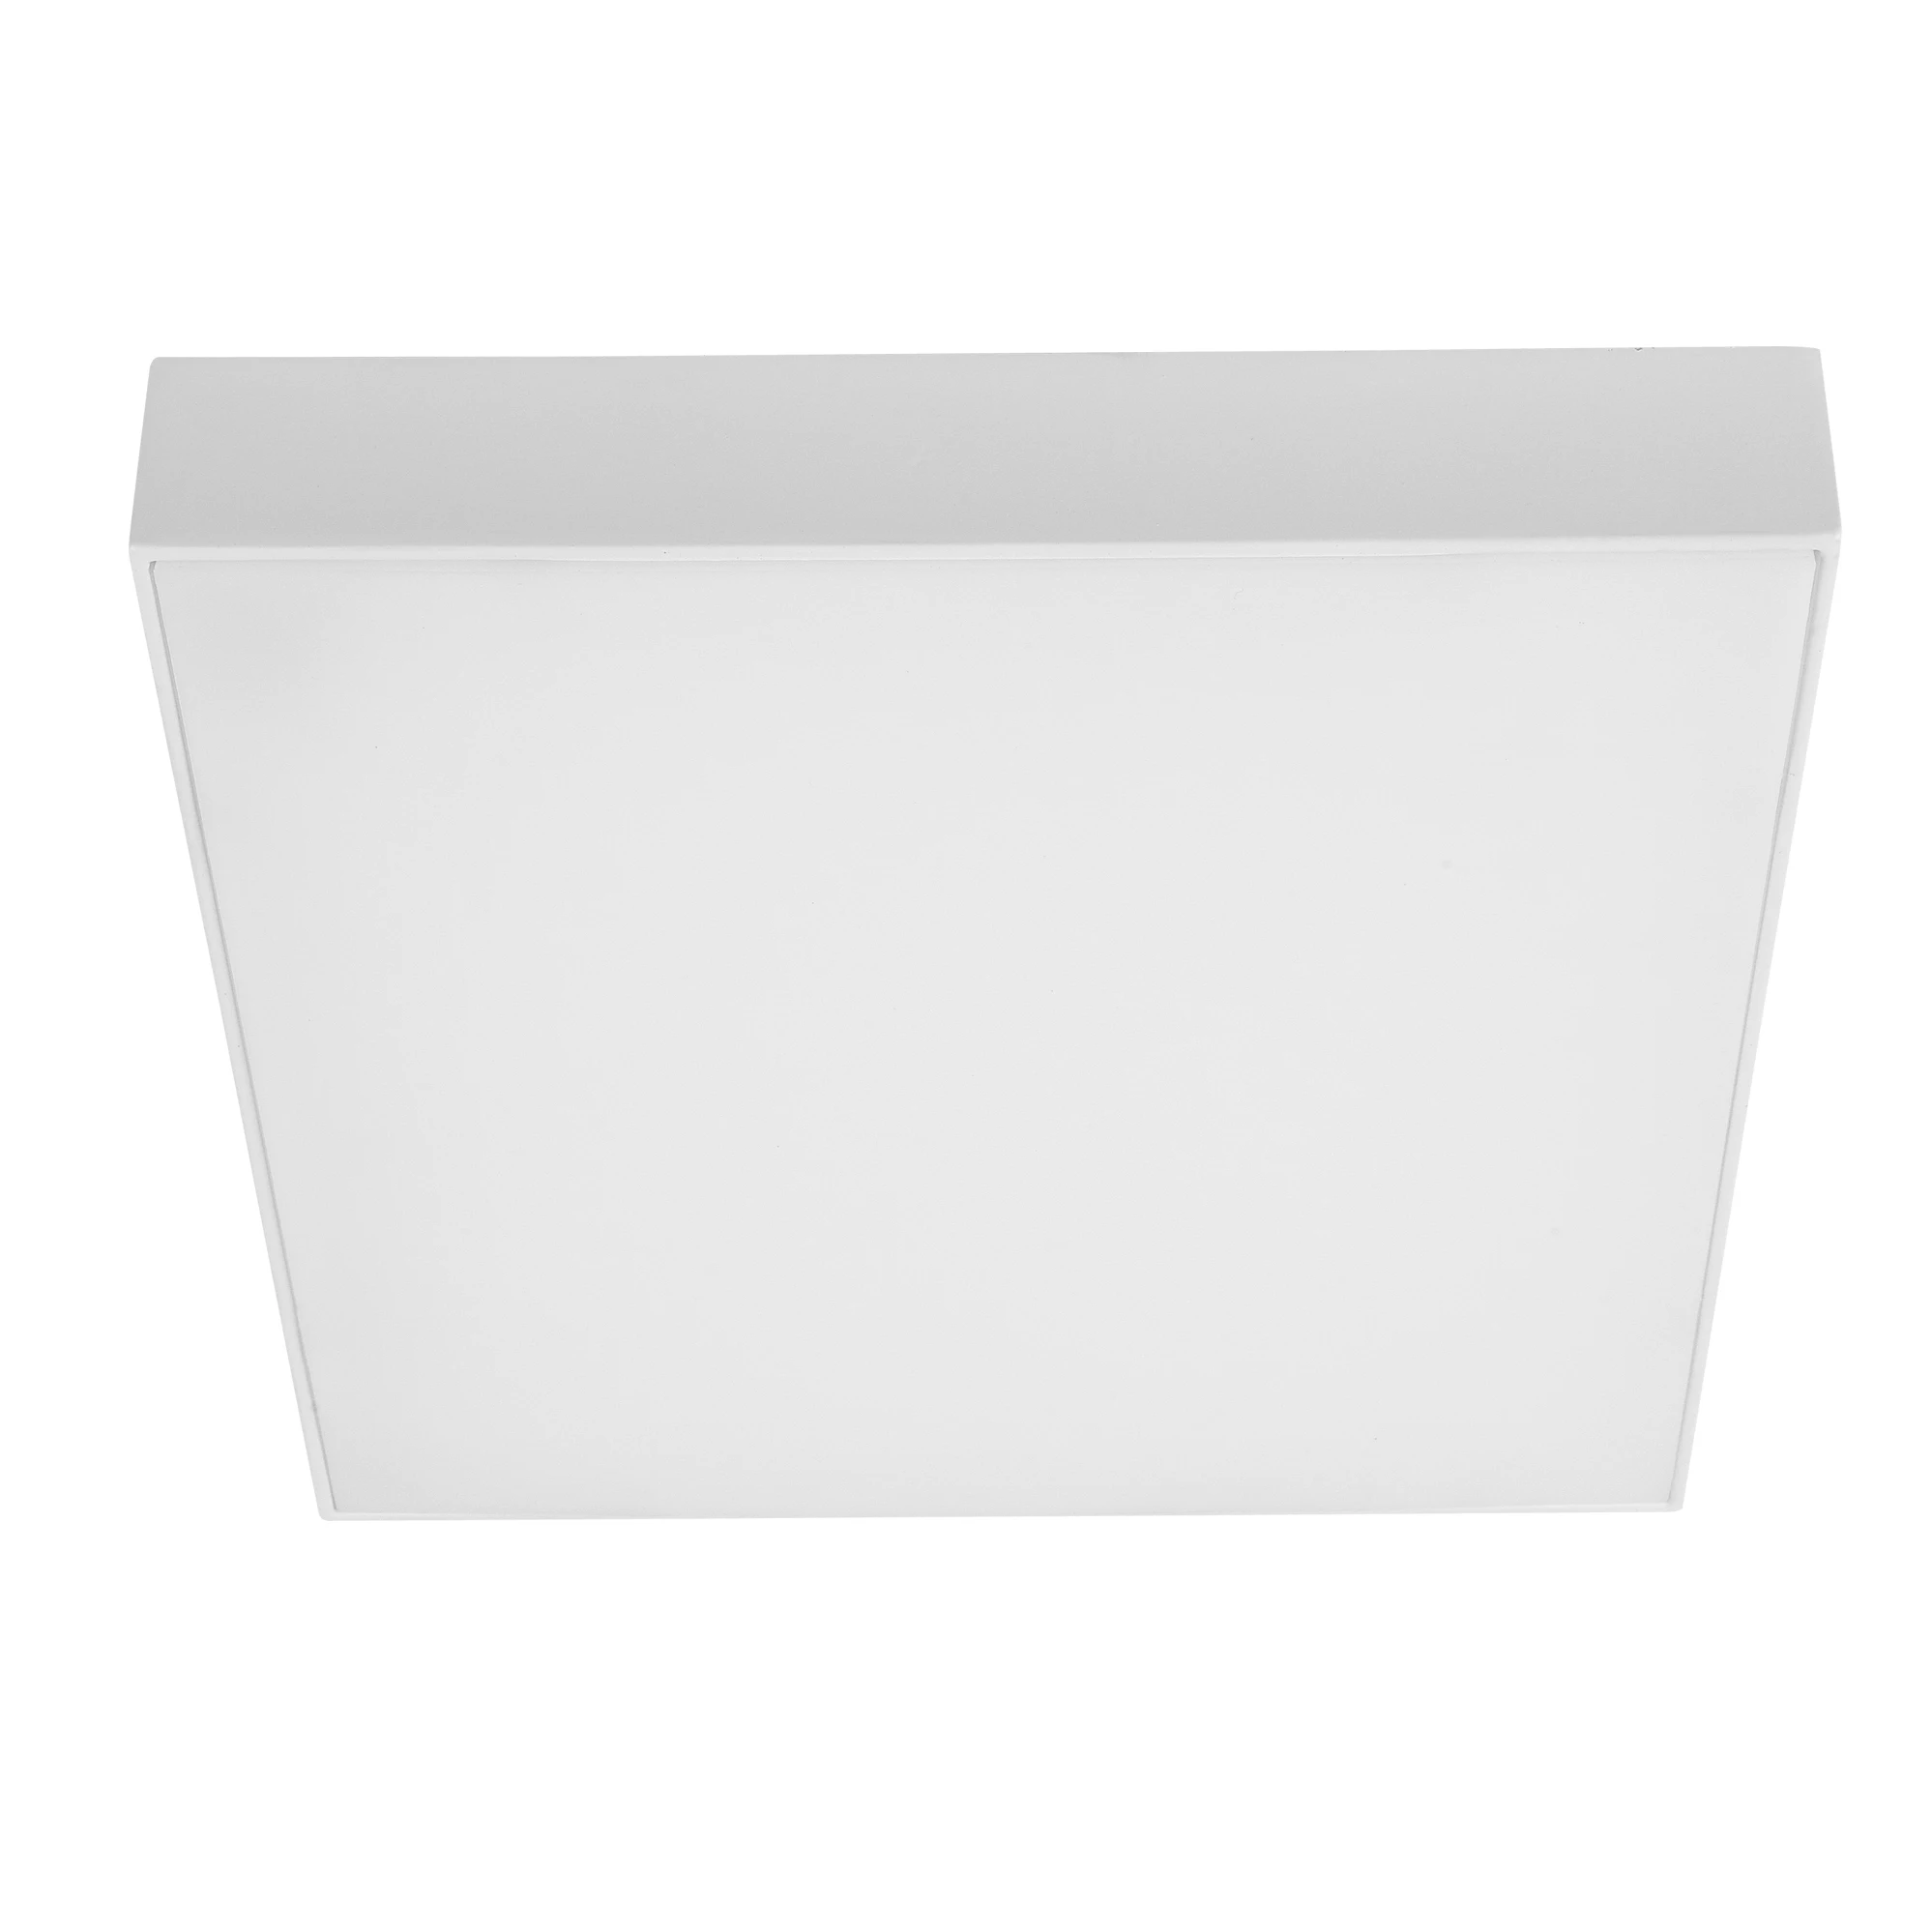 How Bright indoor panel light Wholesale panel lamps quare 16W 24W 30W high quality led ceiling light